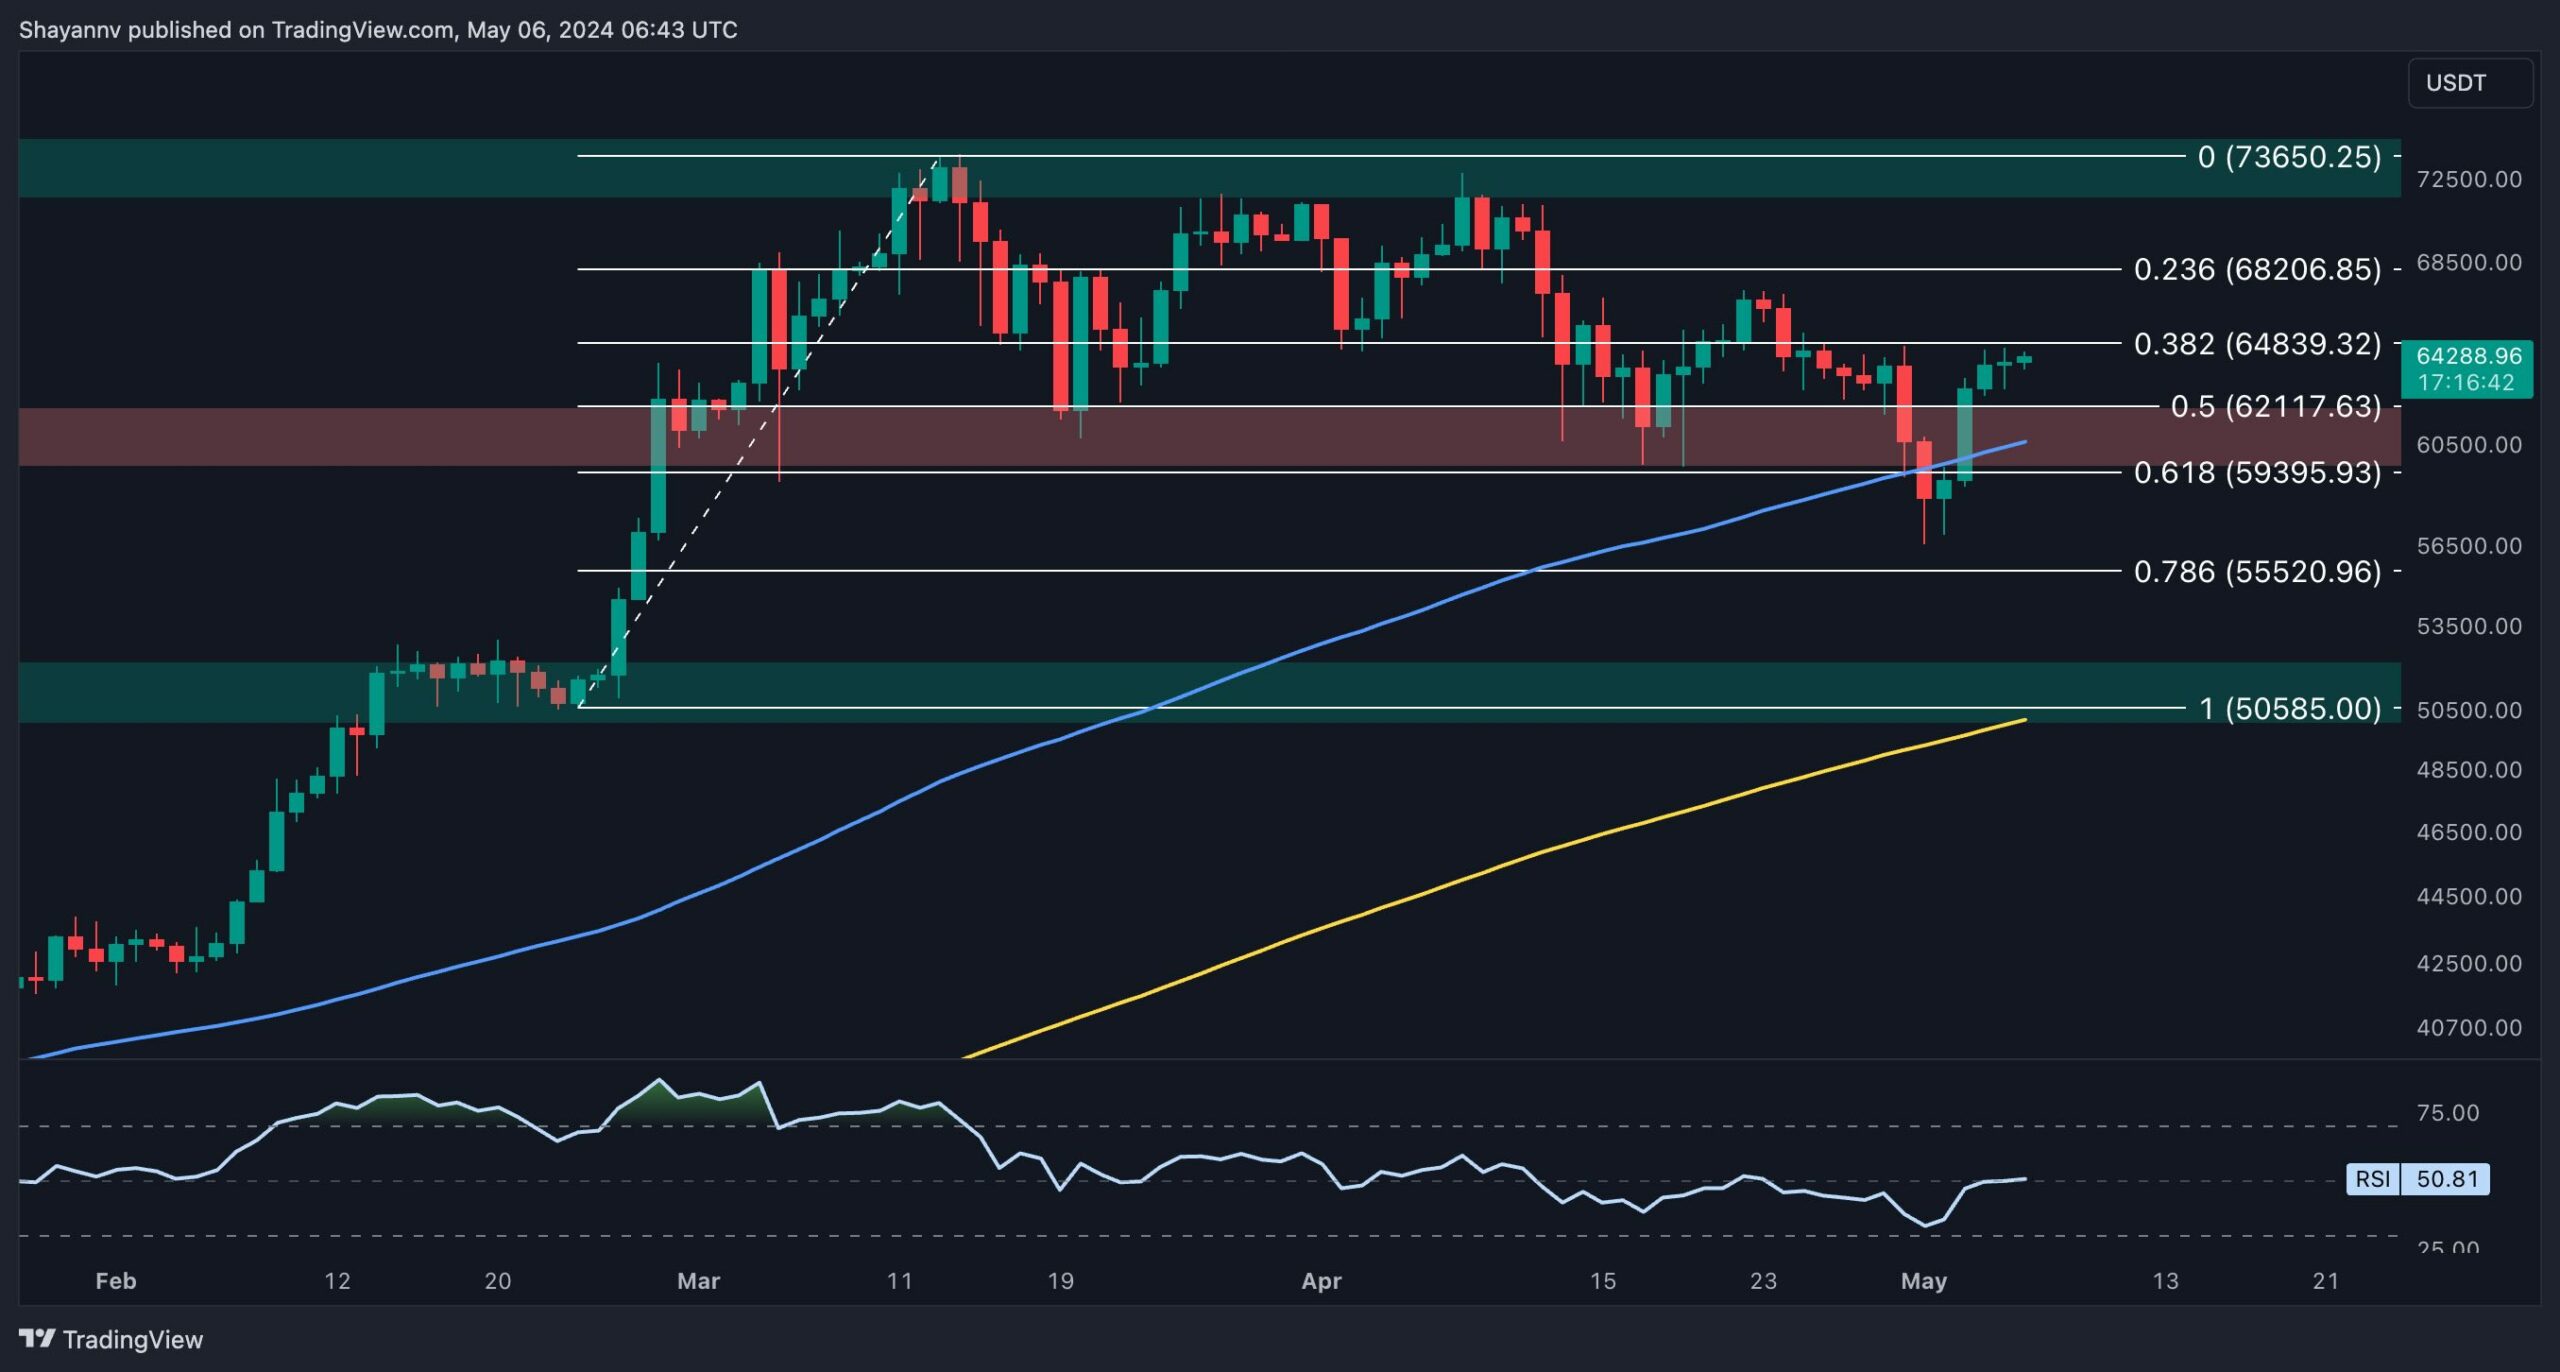 Bitcoin Bull Market Resumed or is the Push to $65K a Trap? (BTC Price Analysis)